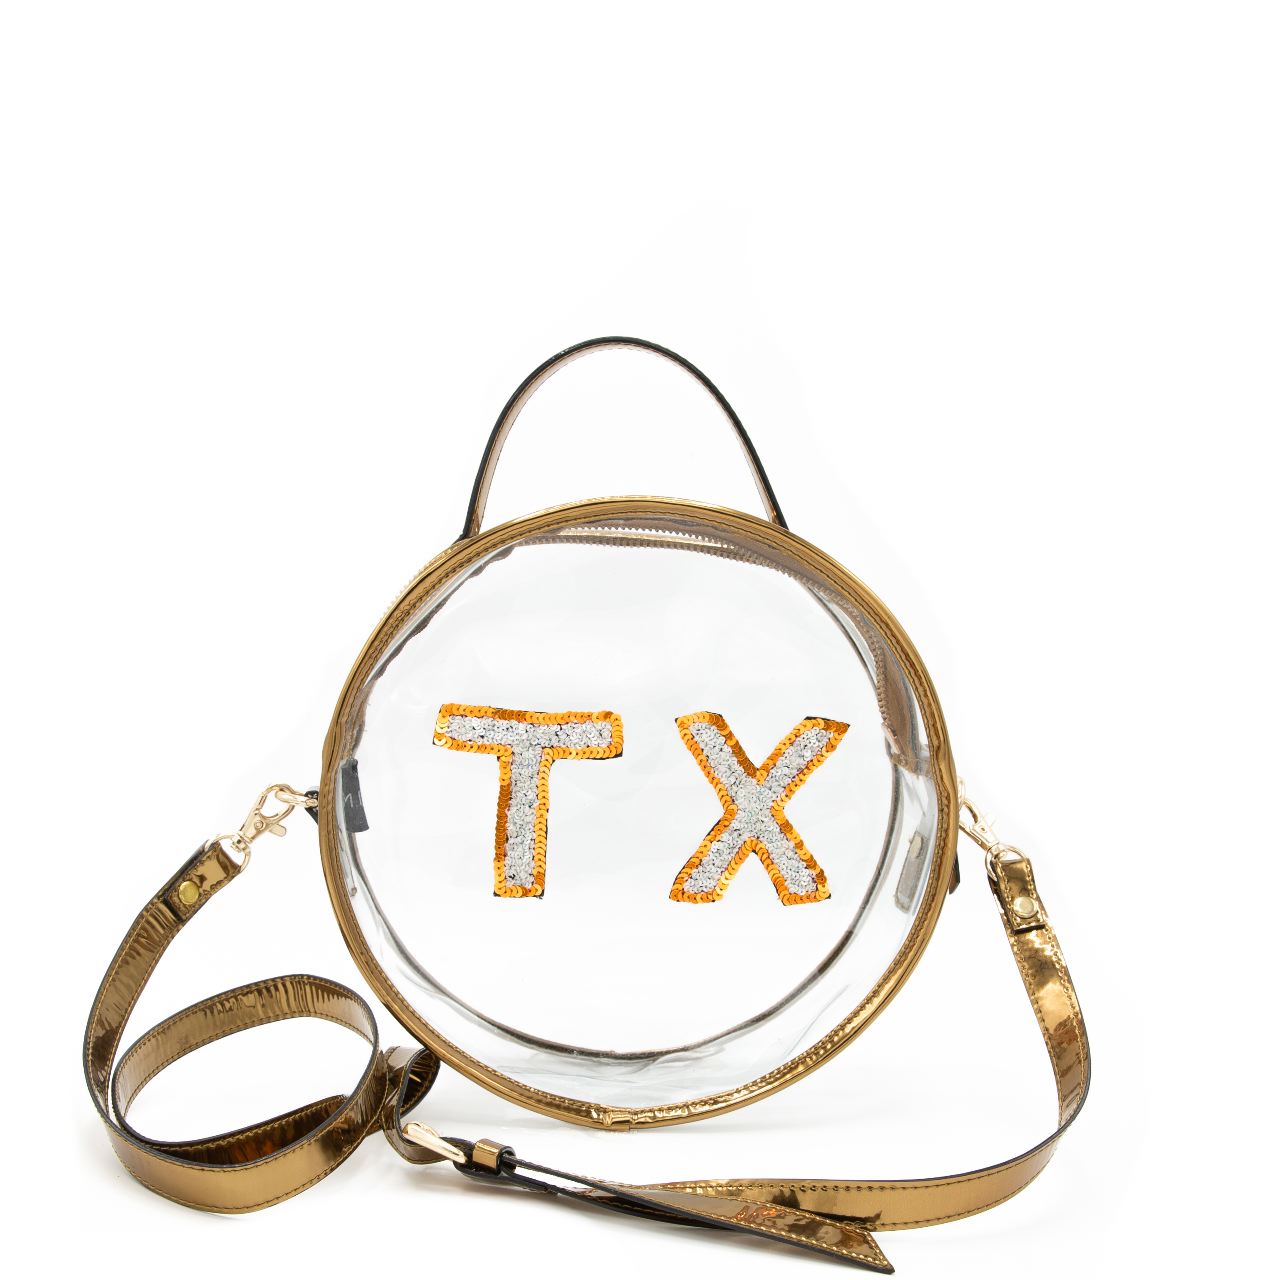 Texas Round Game Day Bag by Simitri